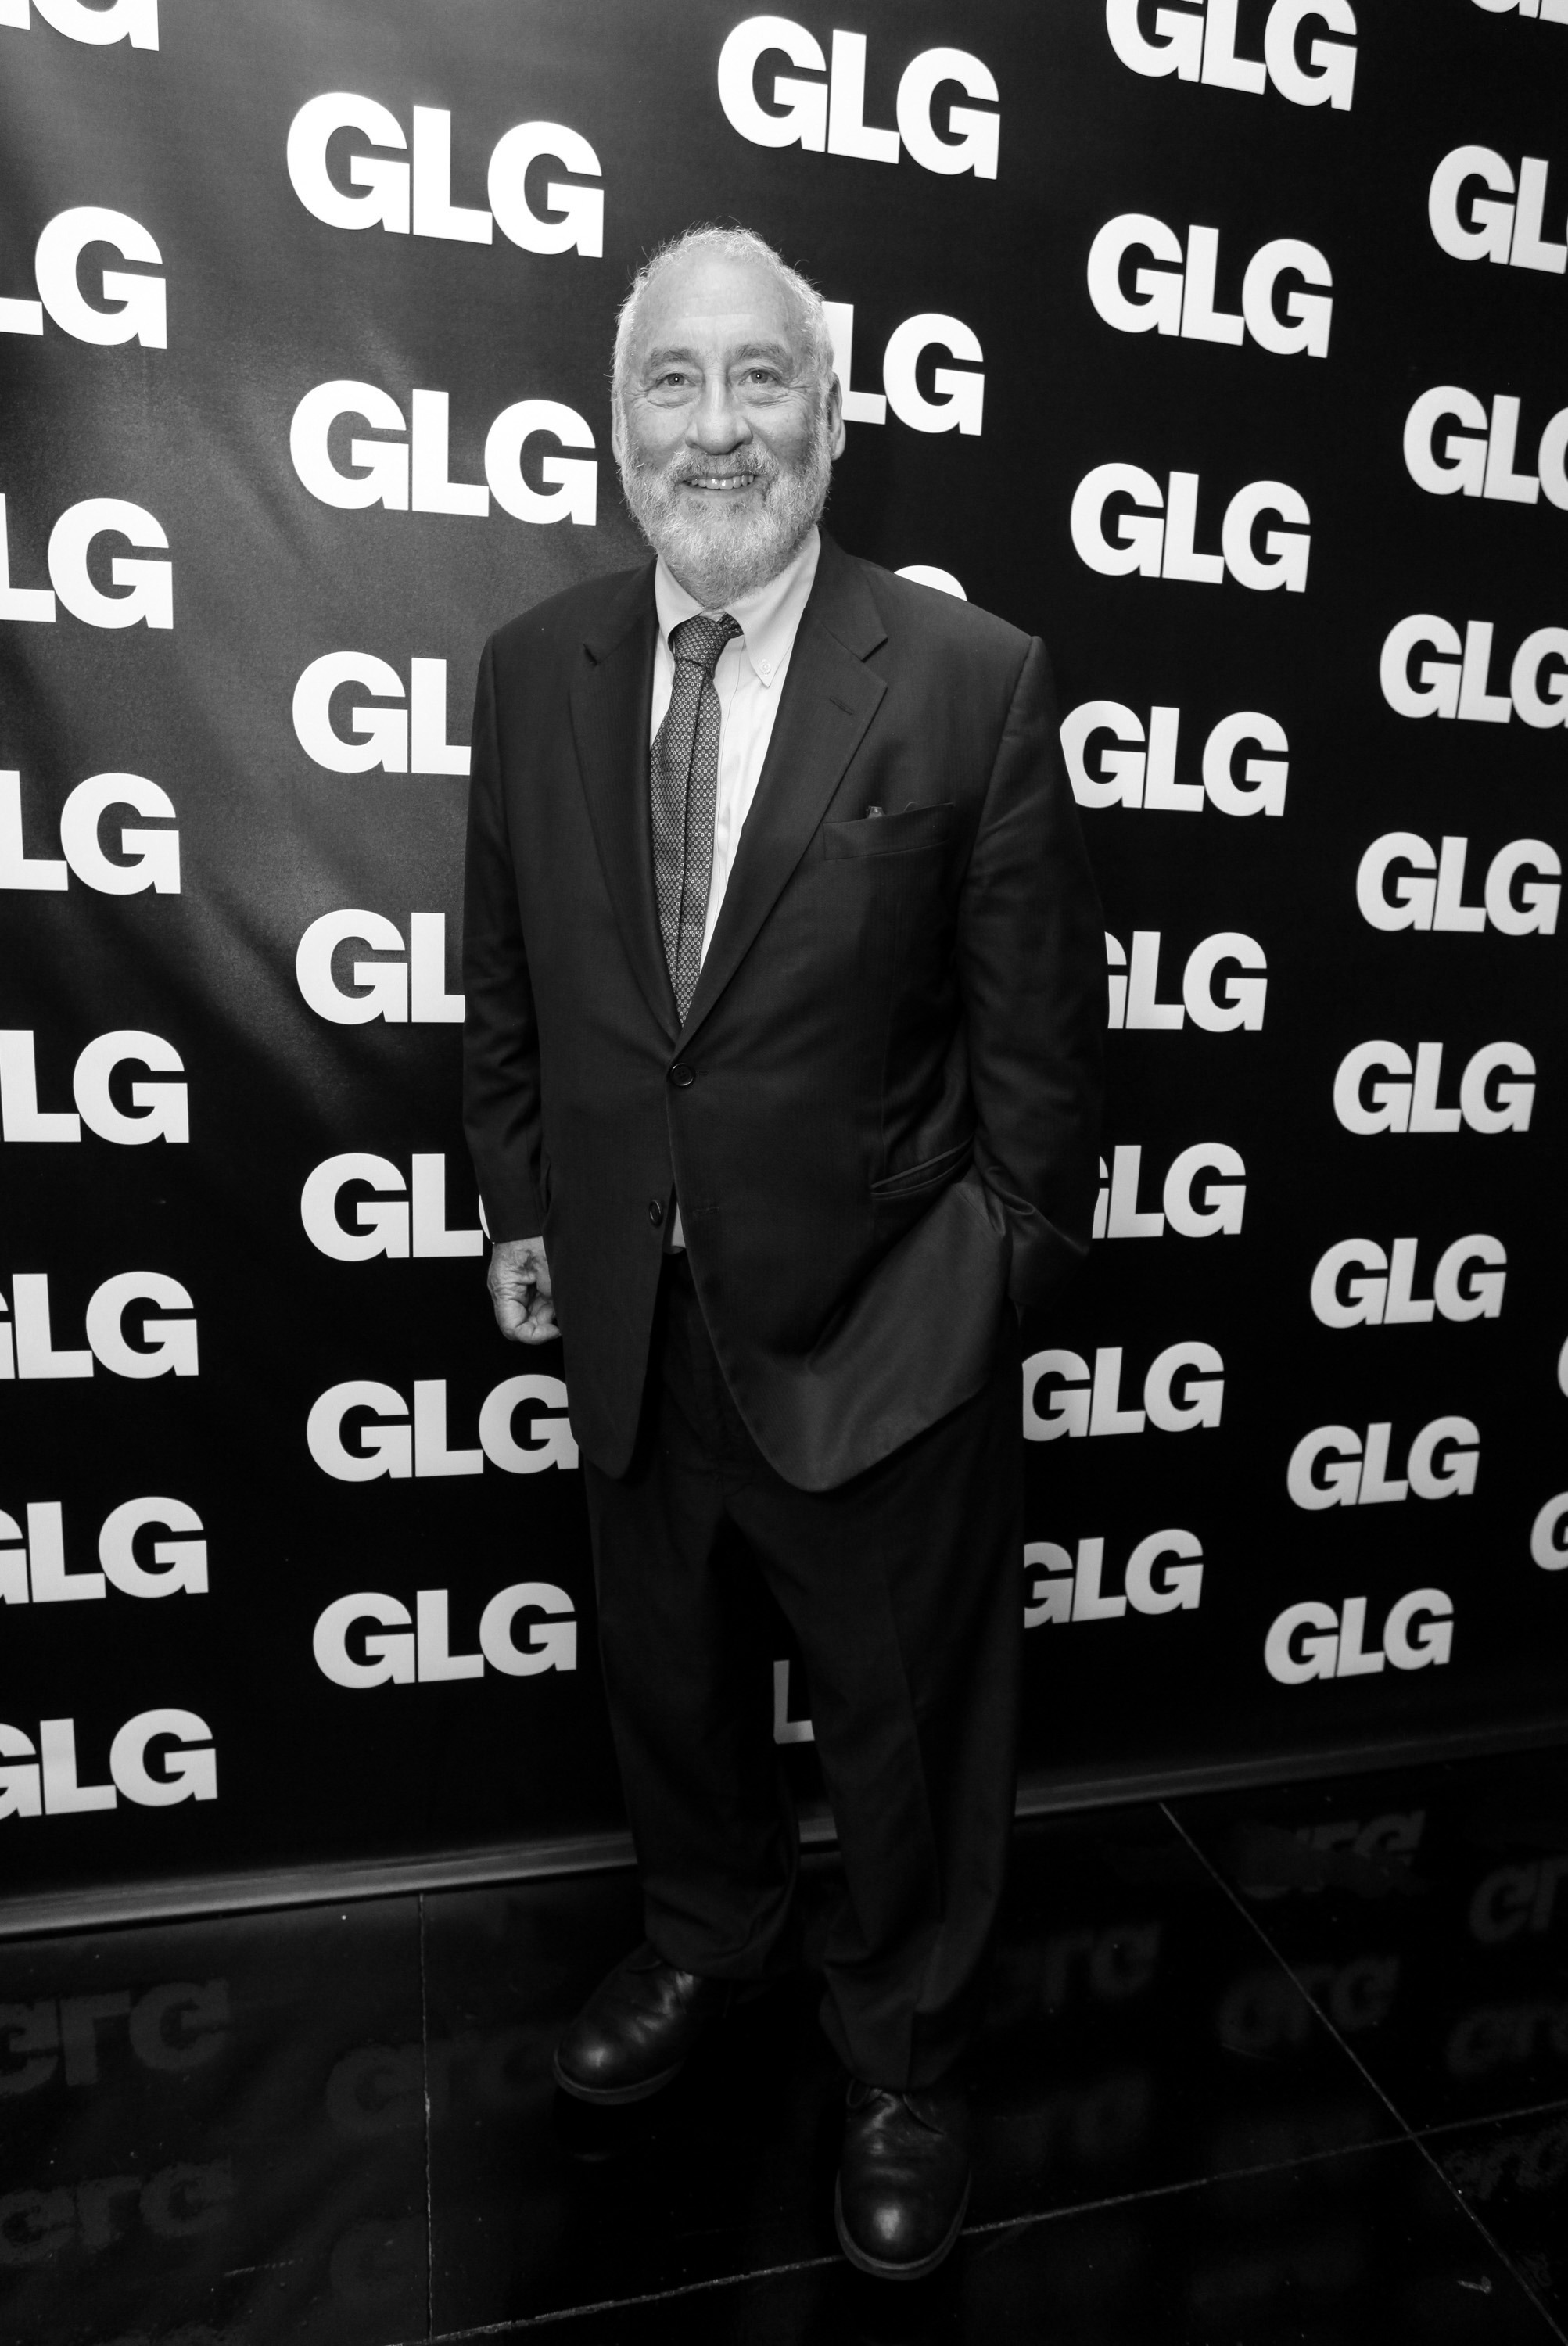 NEW YORK, NY - JULY 28:  Joseph Stiglitz, Former Chief Economist Of The World Bank And Nobel Prize Winner, visits GLG (Gerson Lehrman Group) on July 28, 2015 in New York City.  (Photo by Donald Bowers/Getty Images for GLG) (Donald Bowers—Getty Images)